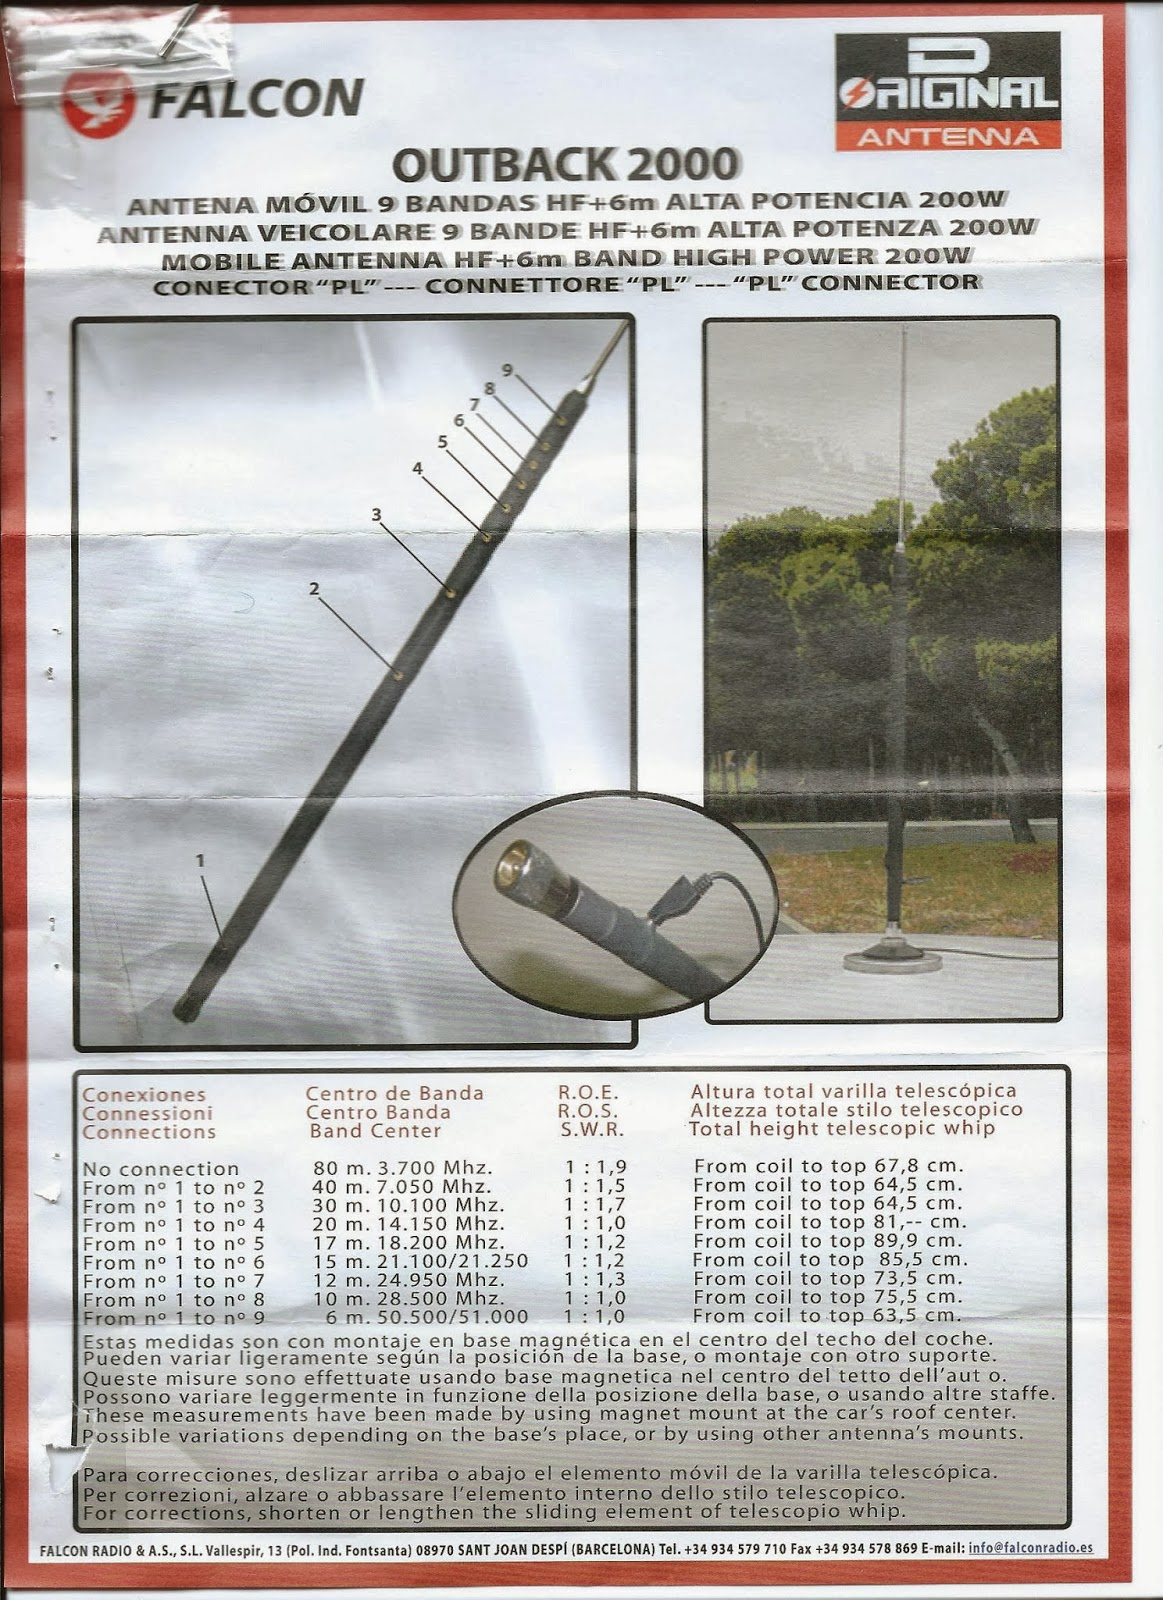 antenne SPX 100 Falcon+Outback+2000